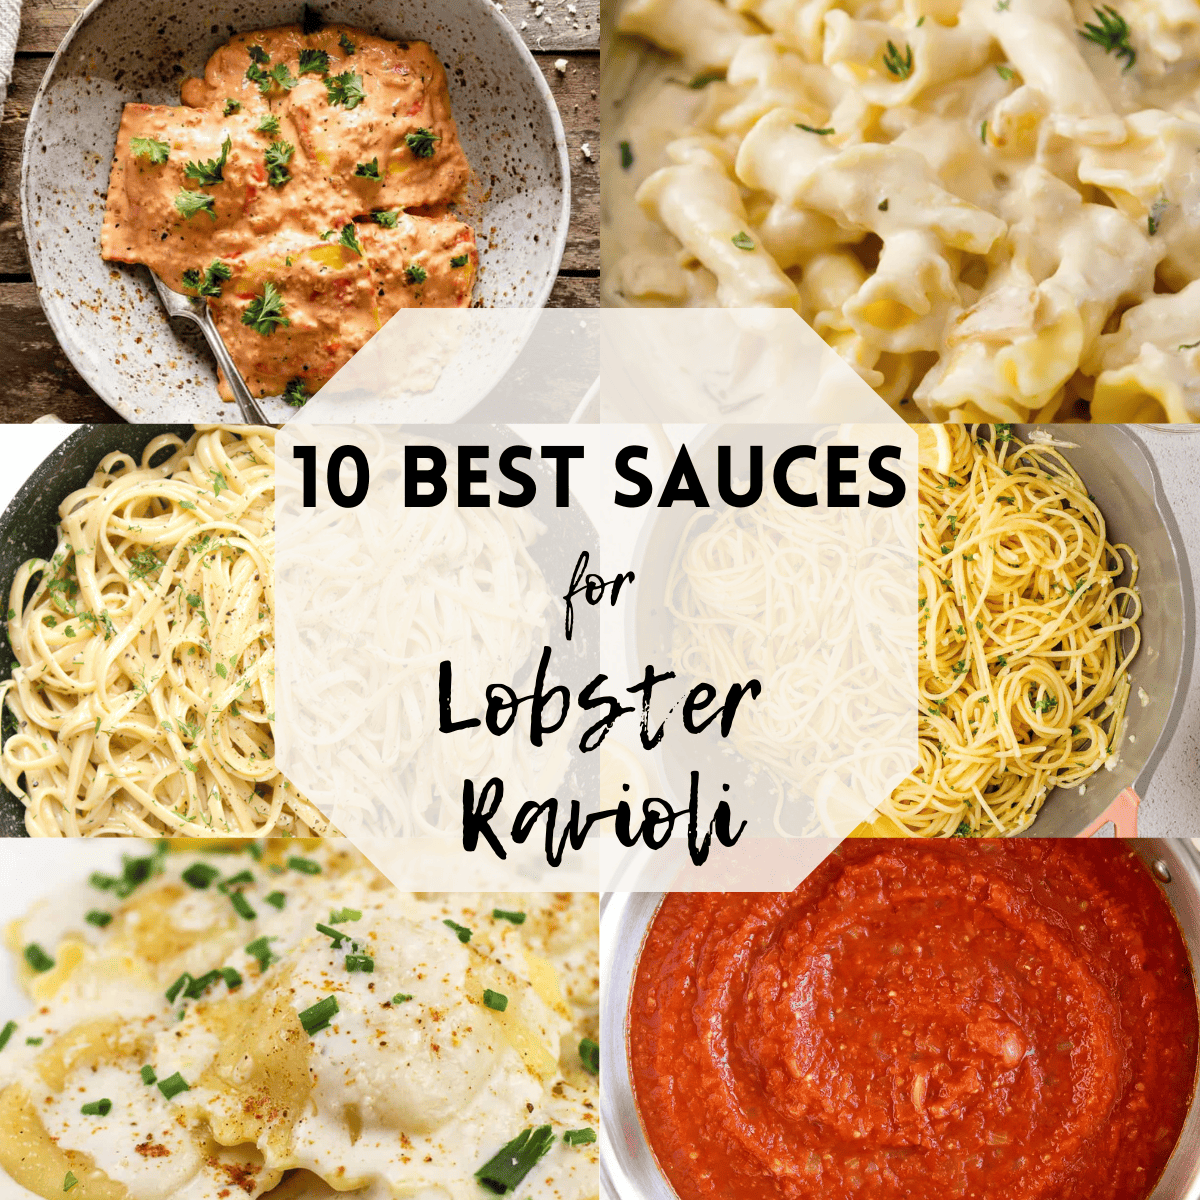 A 6 photo collage showing some of the best sauces for lobster ravioli. 